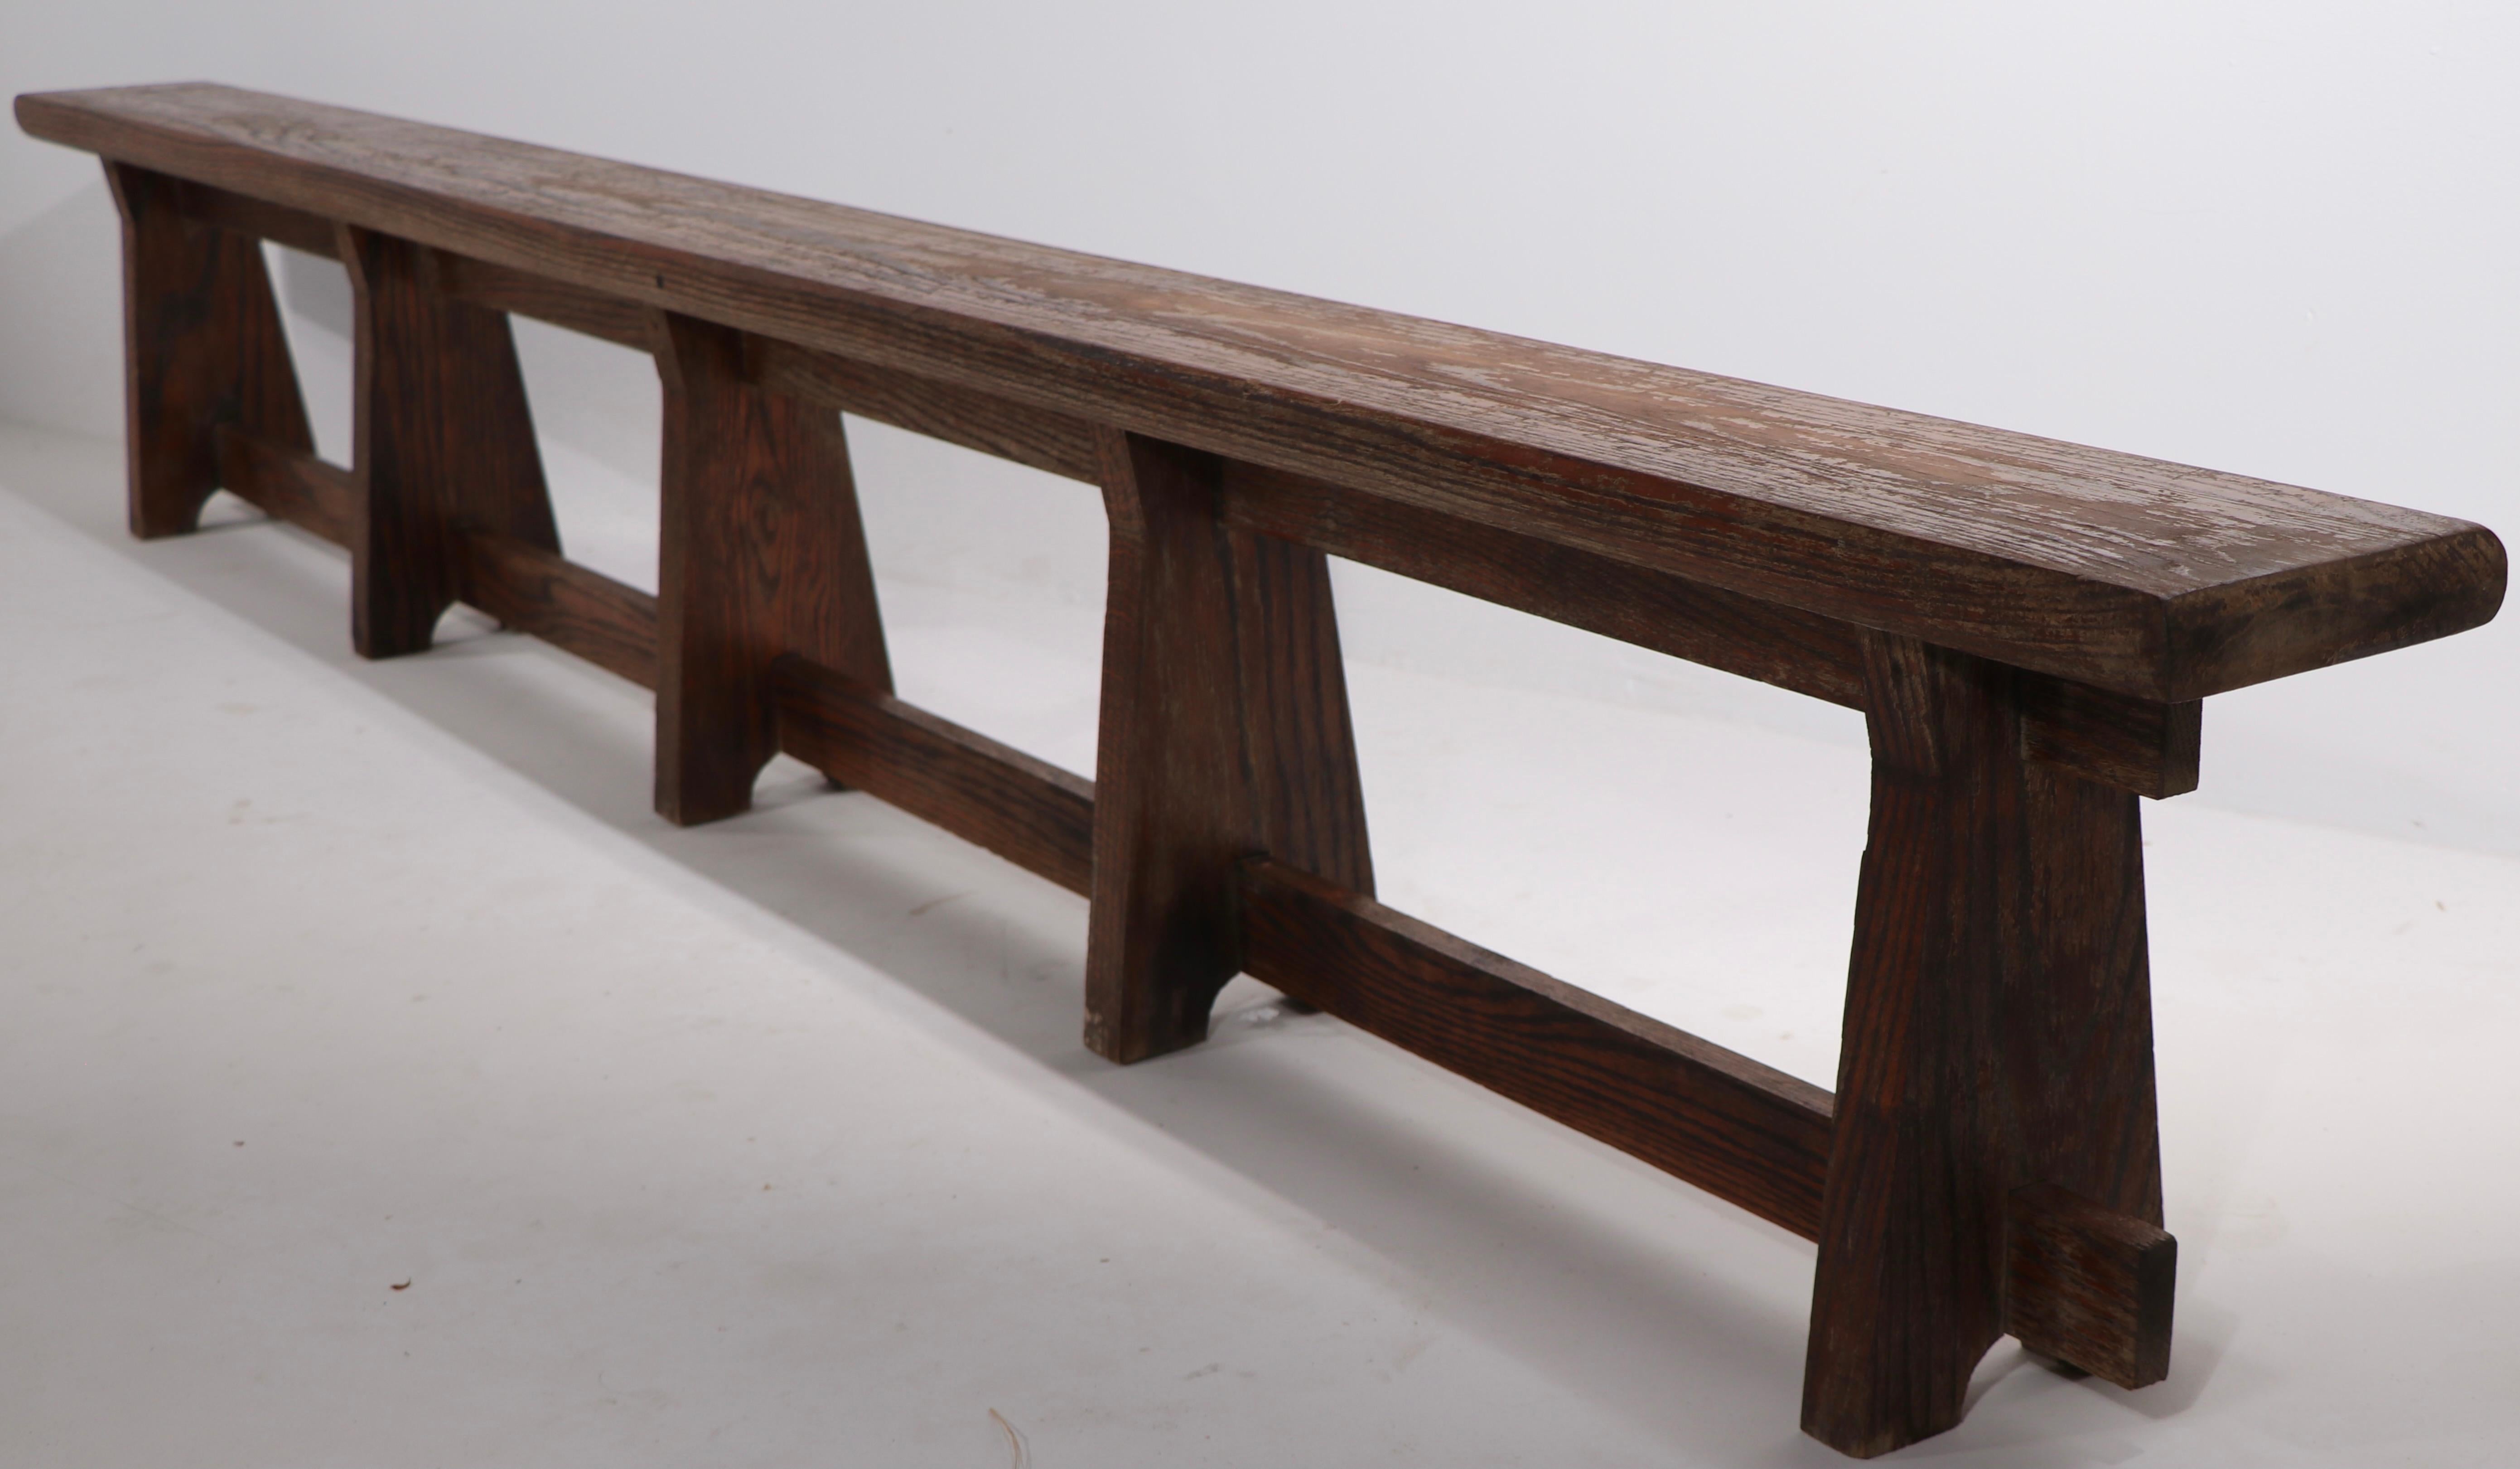 Rustic Adirondack Arts and Crafts Style Benches 4